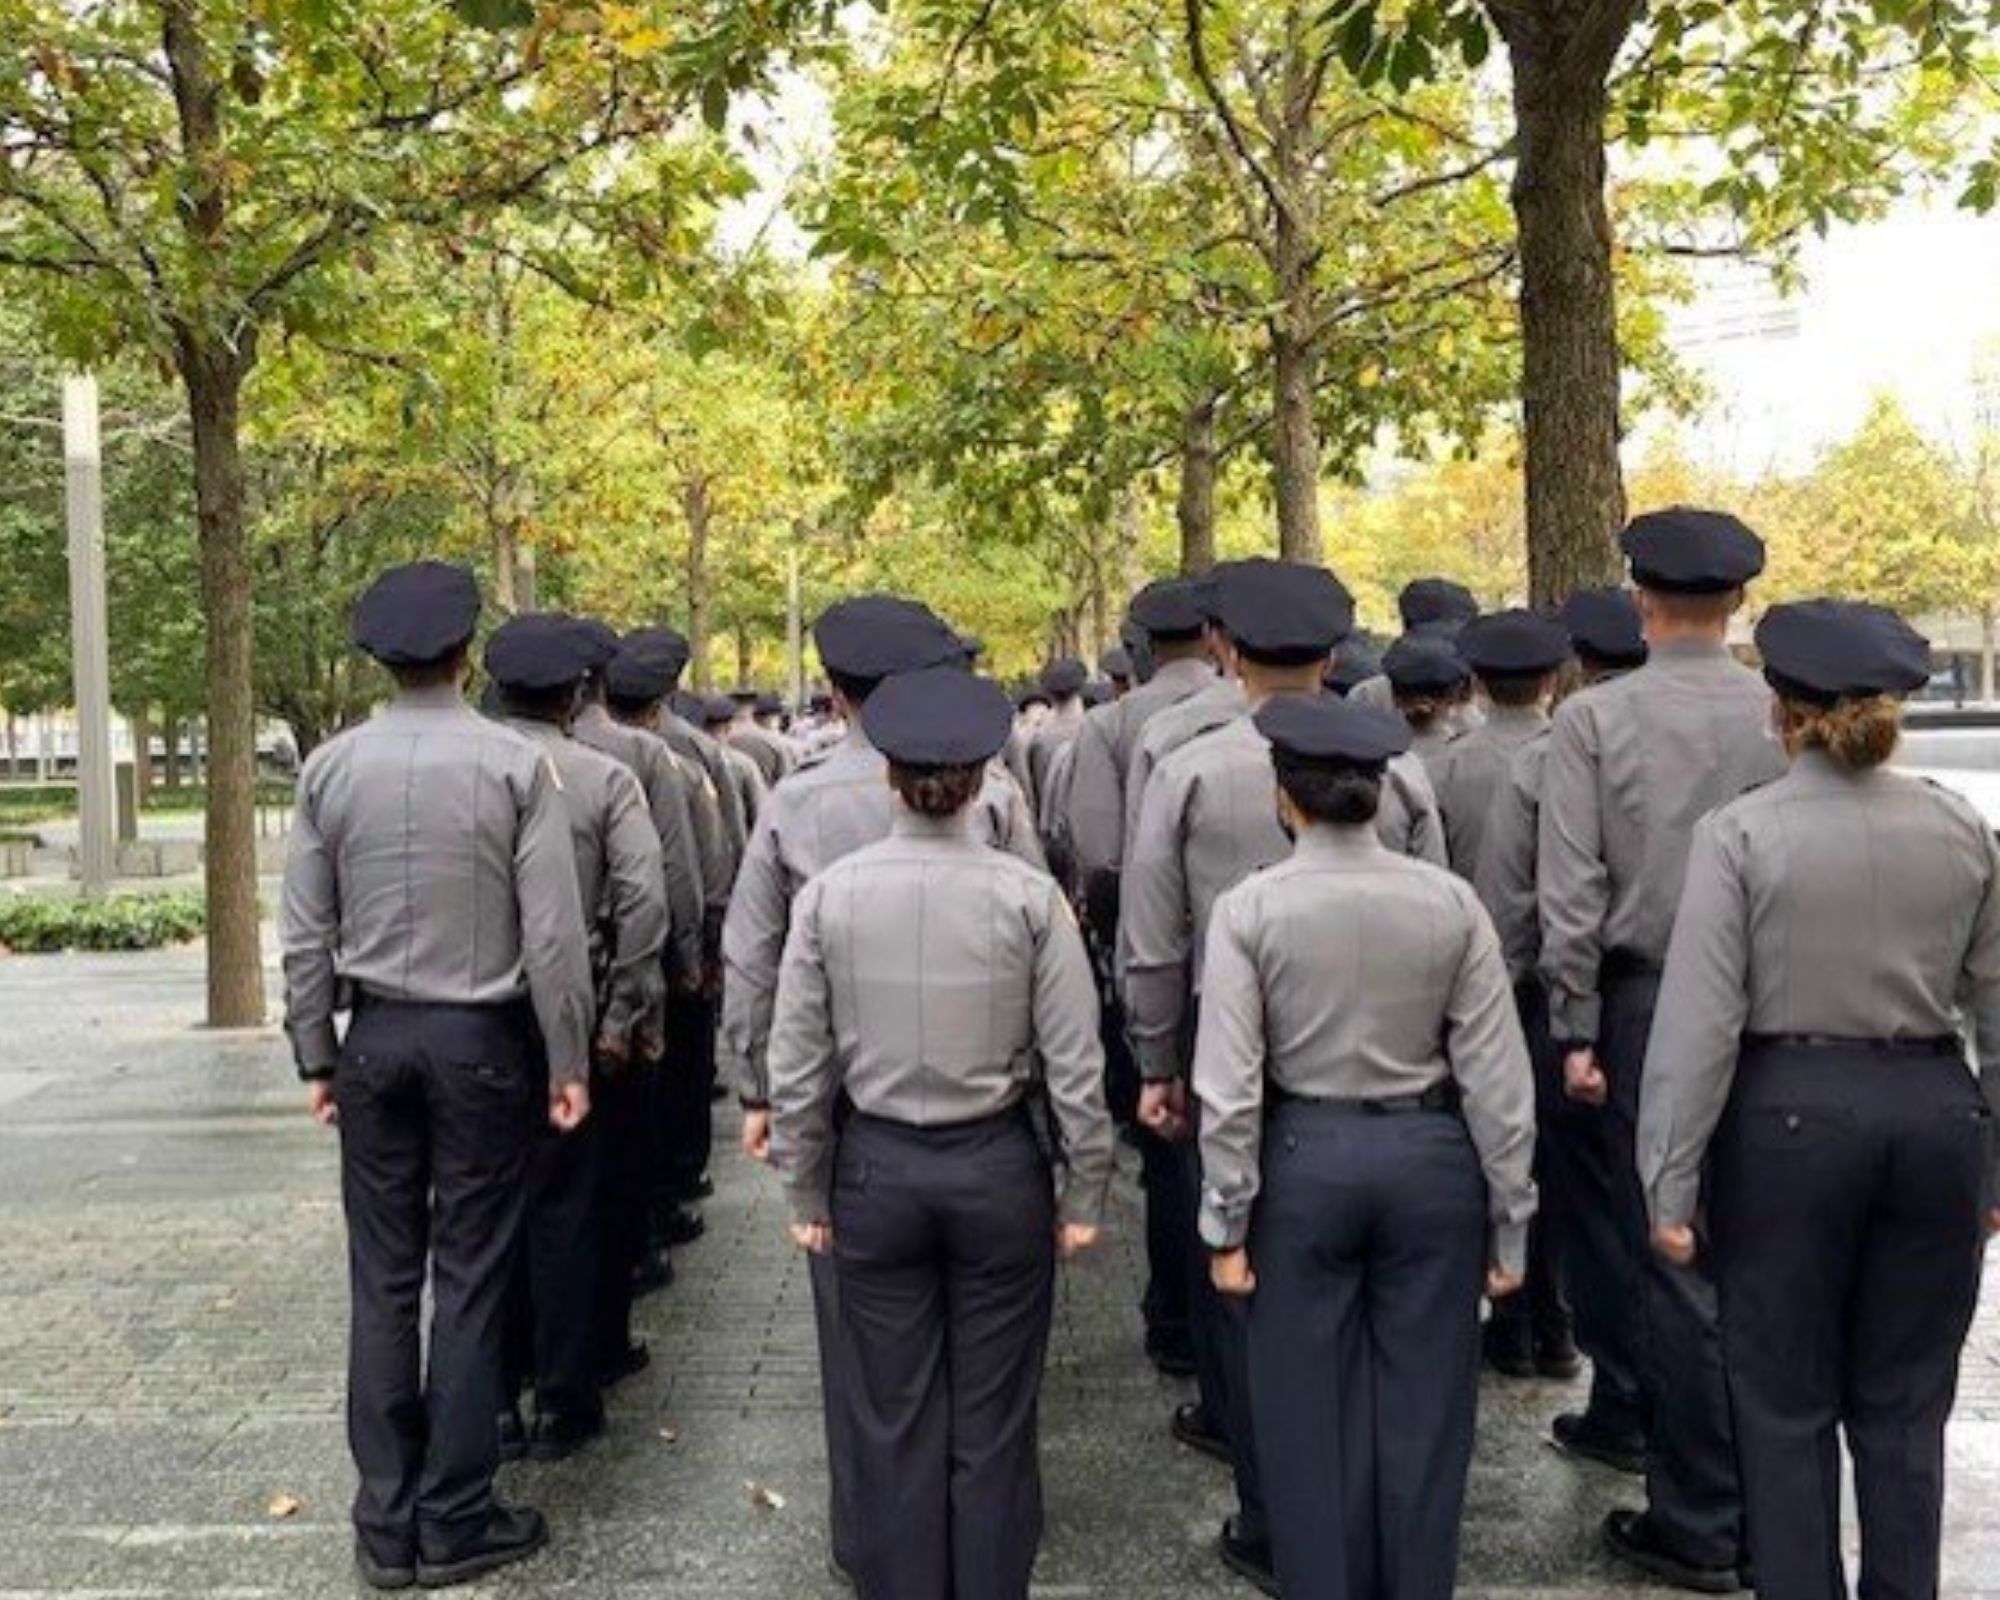 Back view of NYPD recruits gathered at the Memorial 